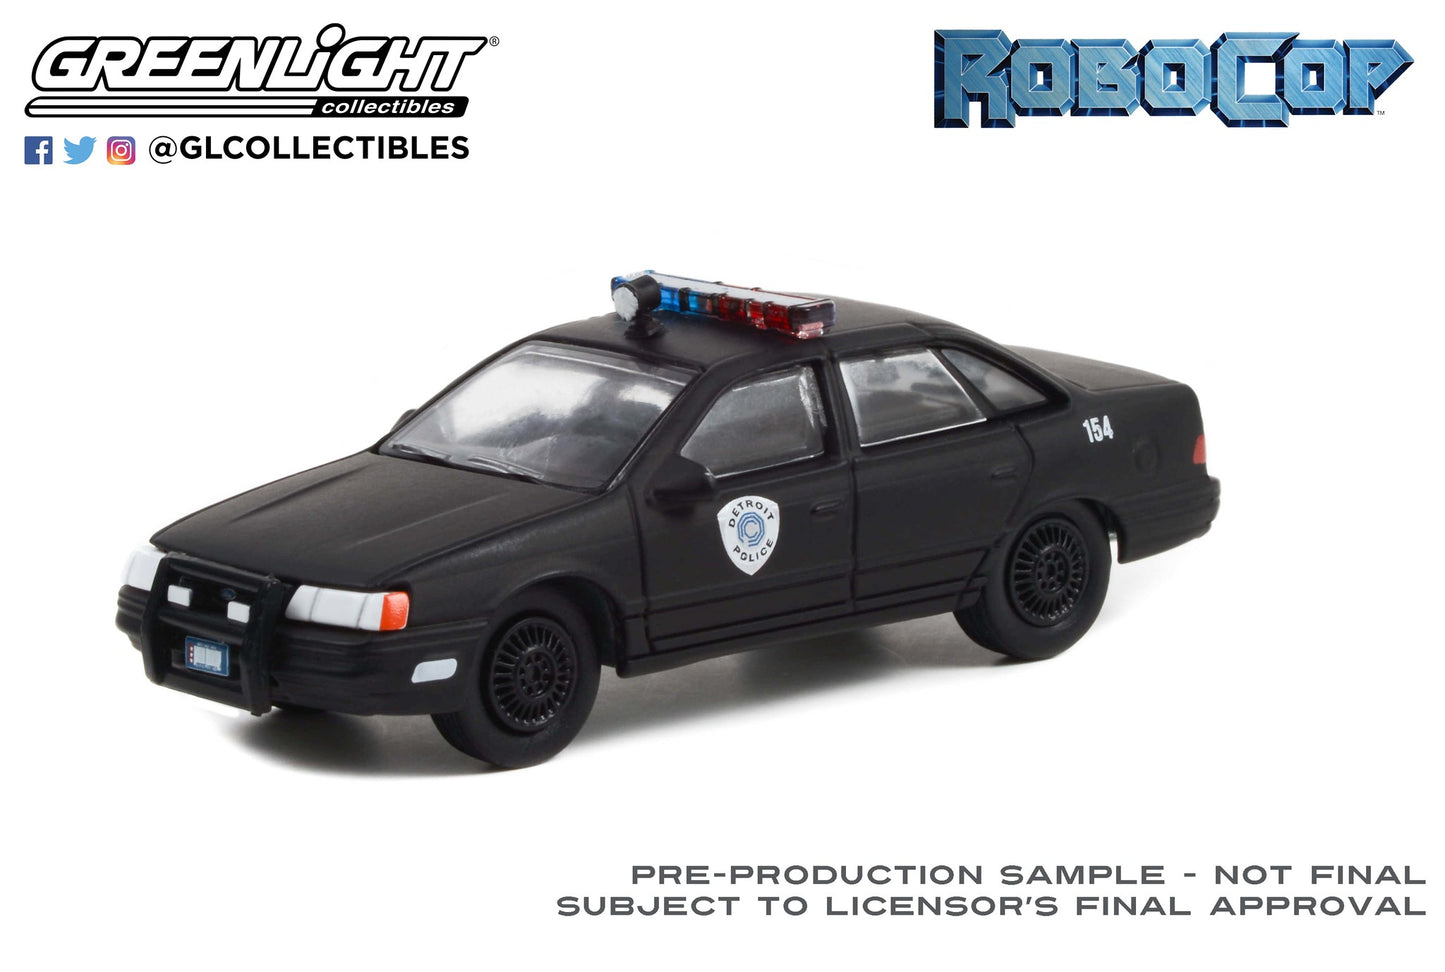 GreenLight 1:64 Hollywood Series 34 - RoboCop (1987) - 1986 Ford Taurus LX - Detroit Metro West Police 44940-D